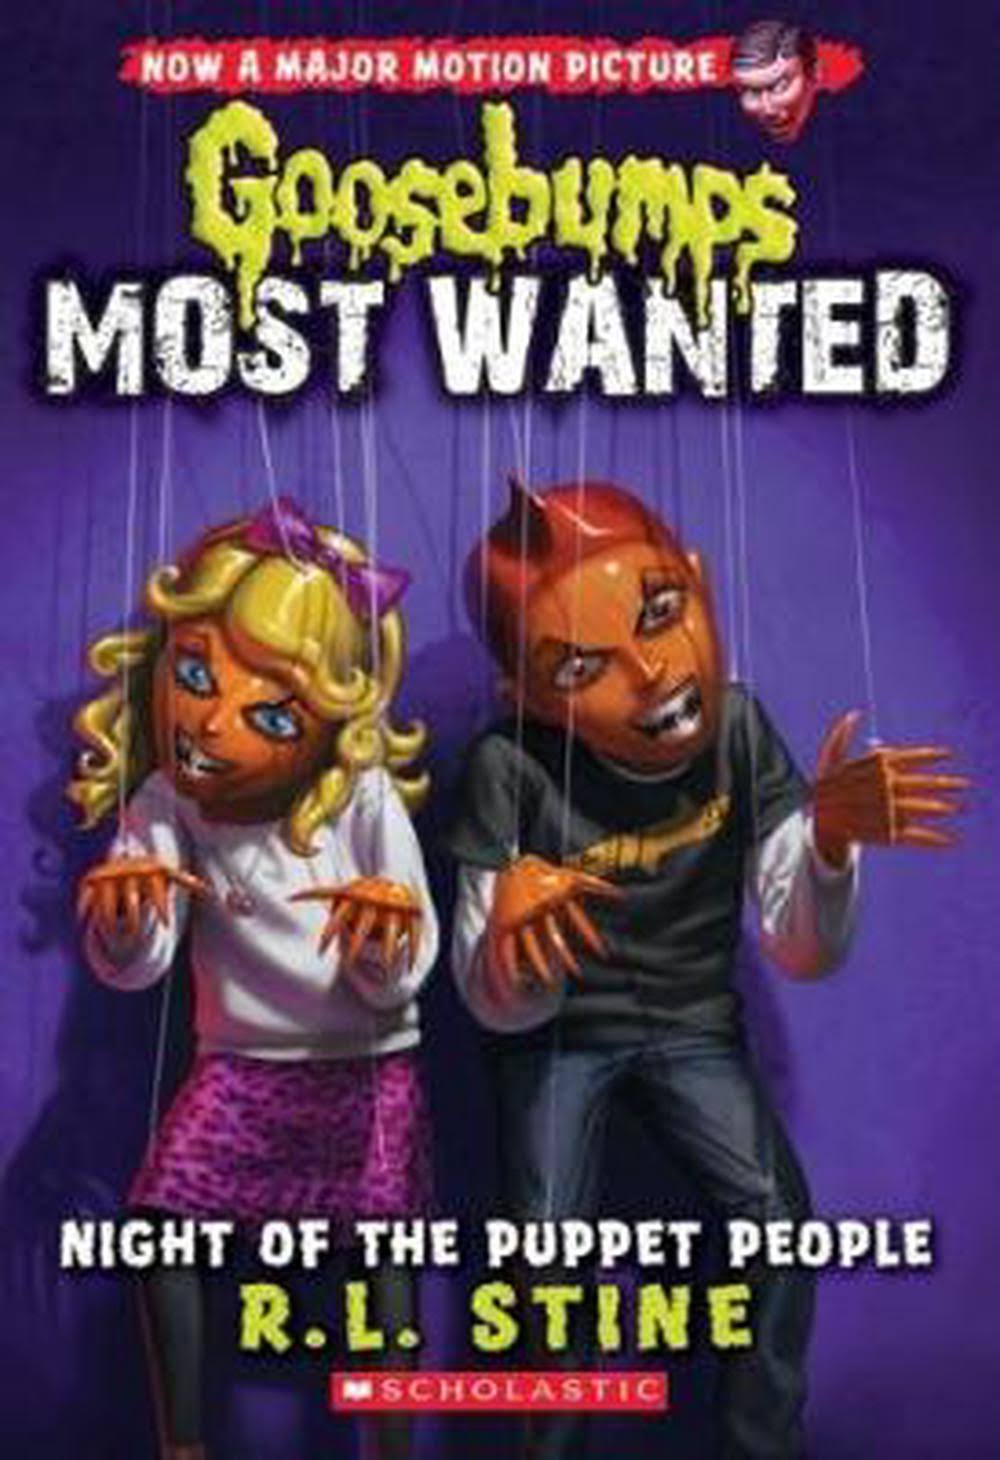 Goosebumps Most Wanted: Night Of The Puppet People - R. L. Stine